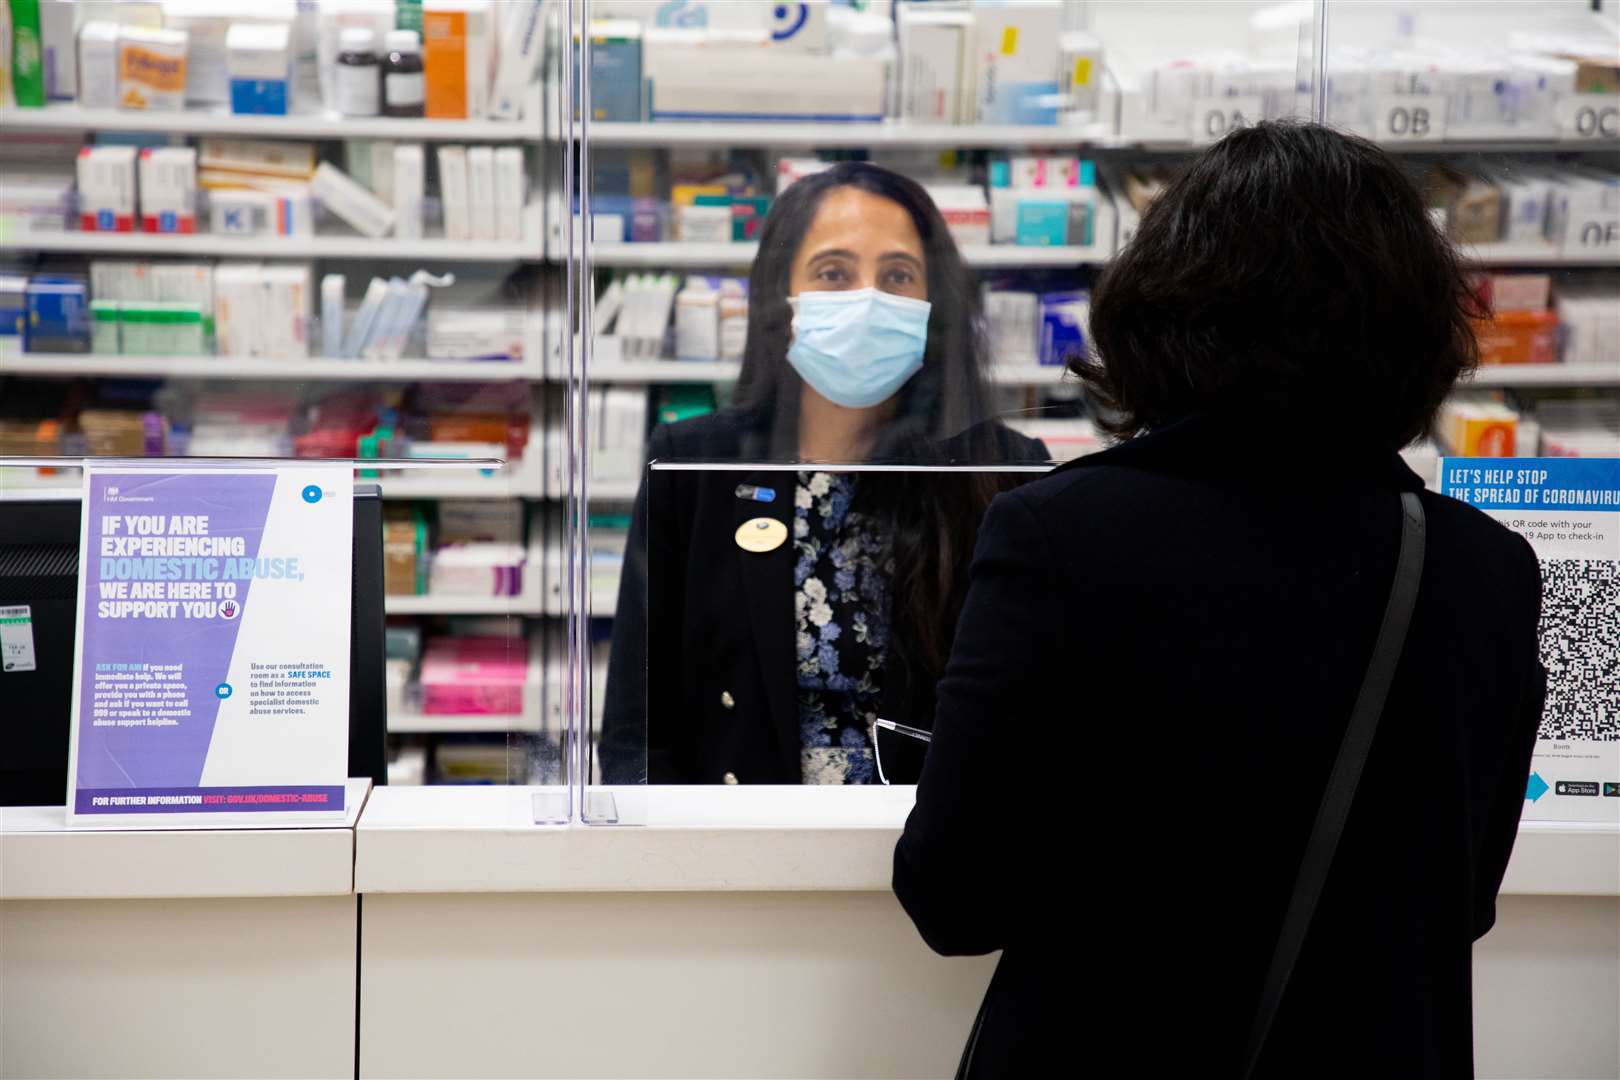 Walgreens Boots Alliance said it does not comment on market speculation (David Parry/PA)